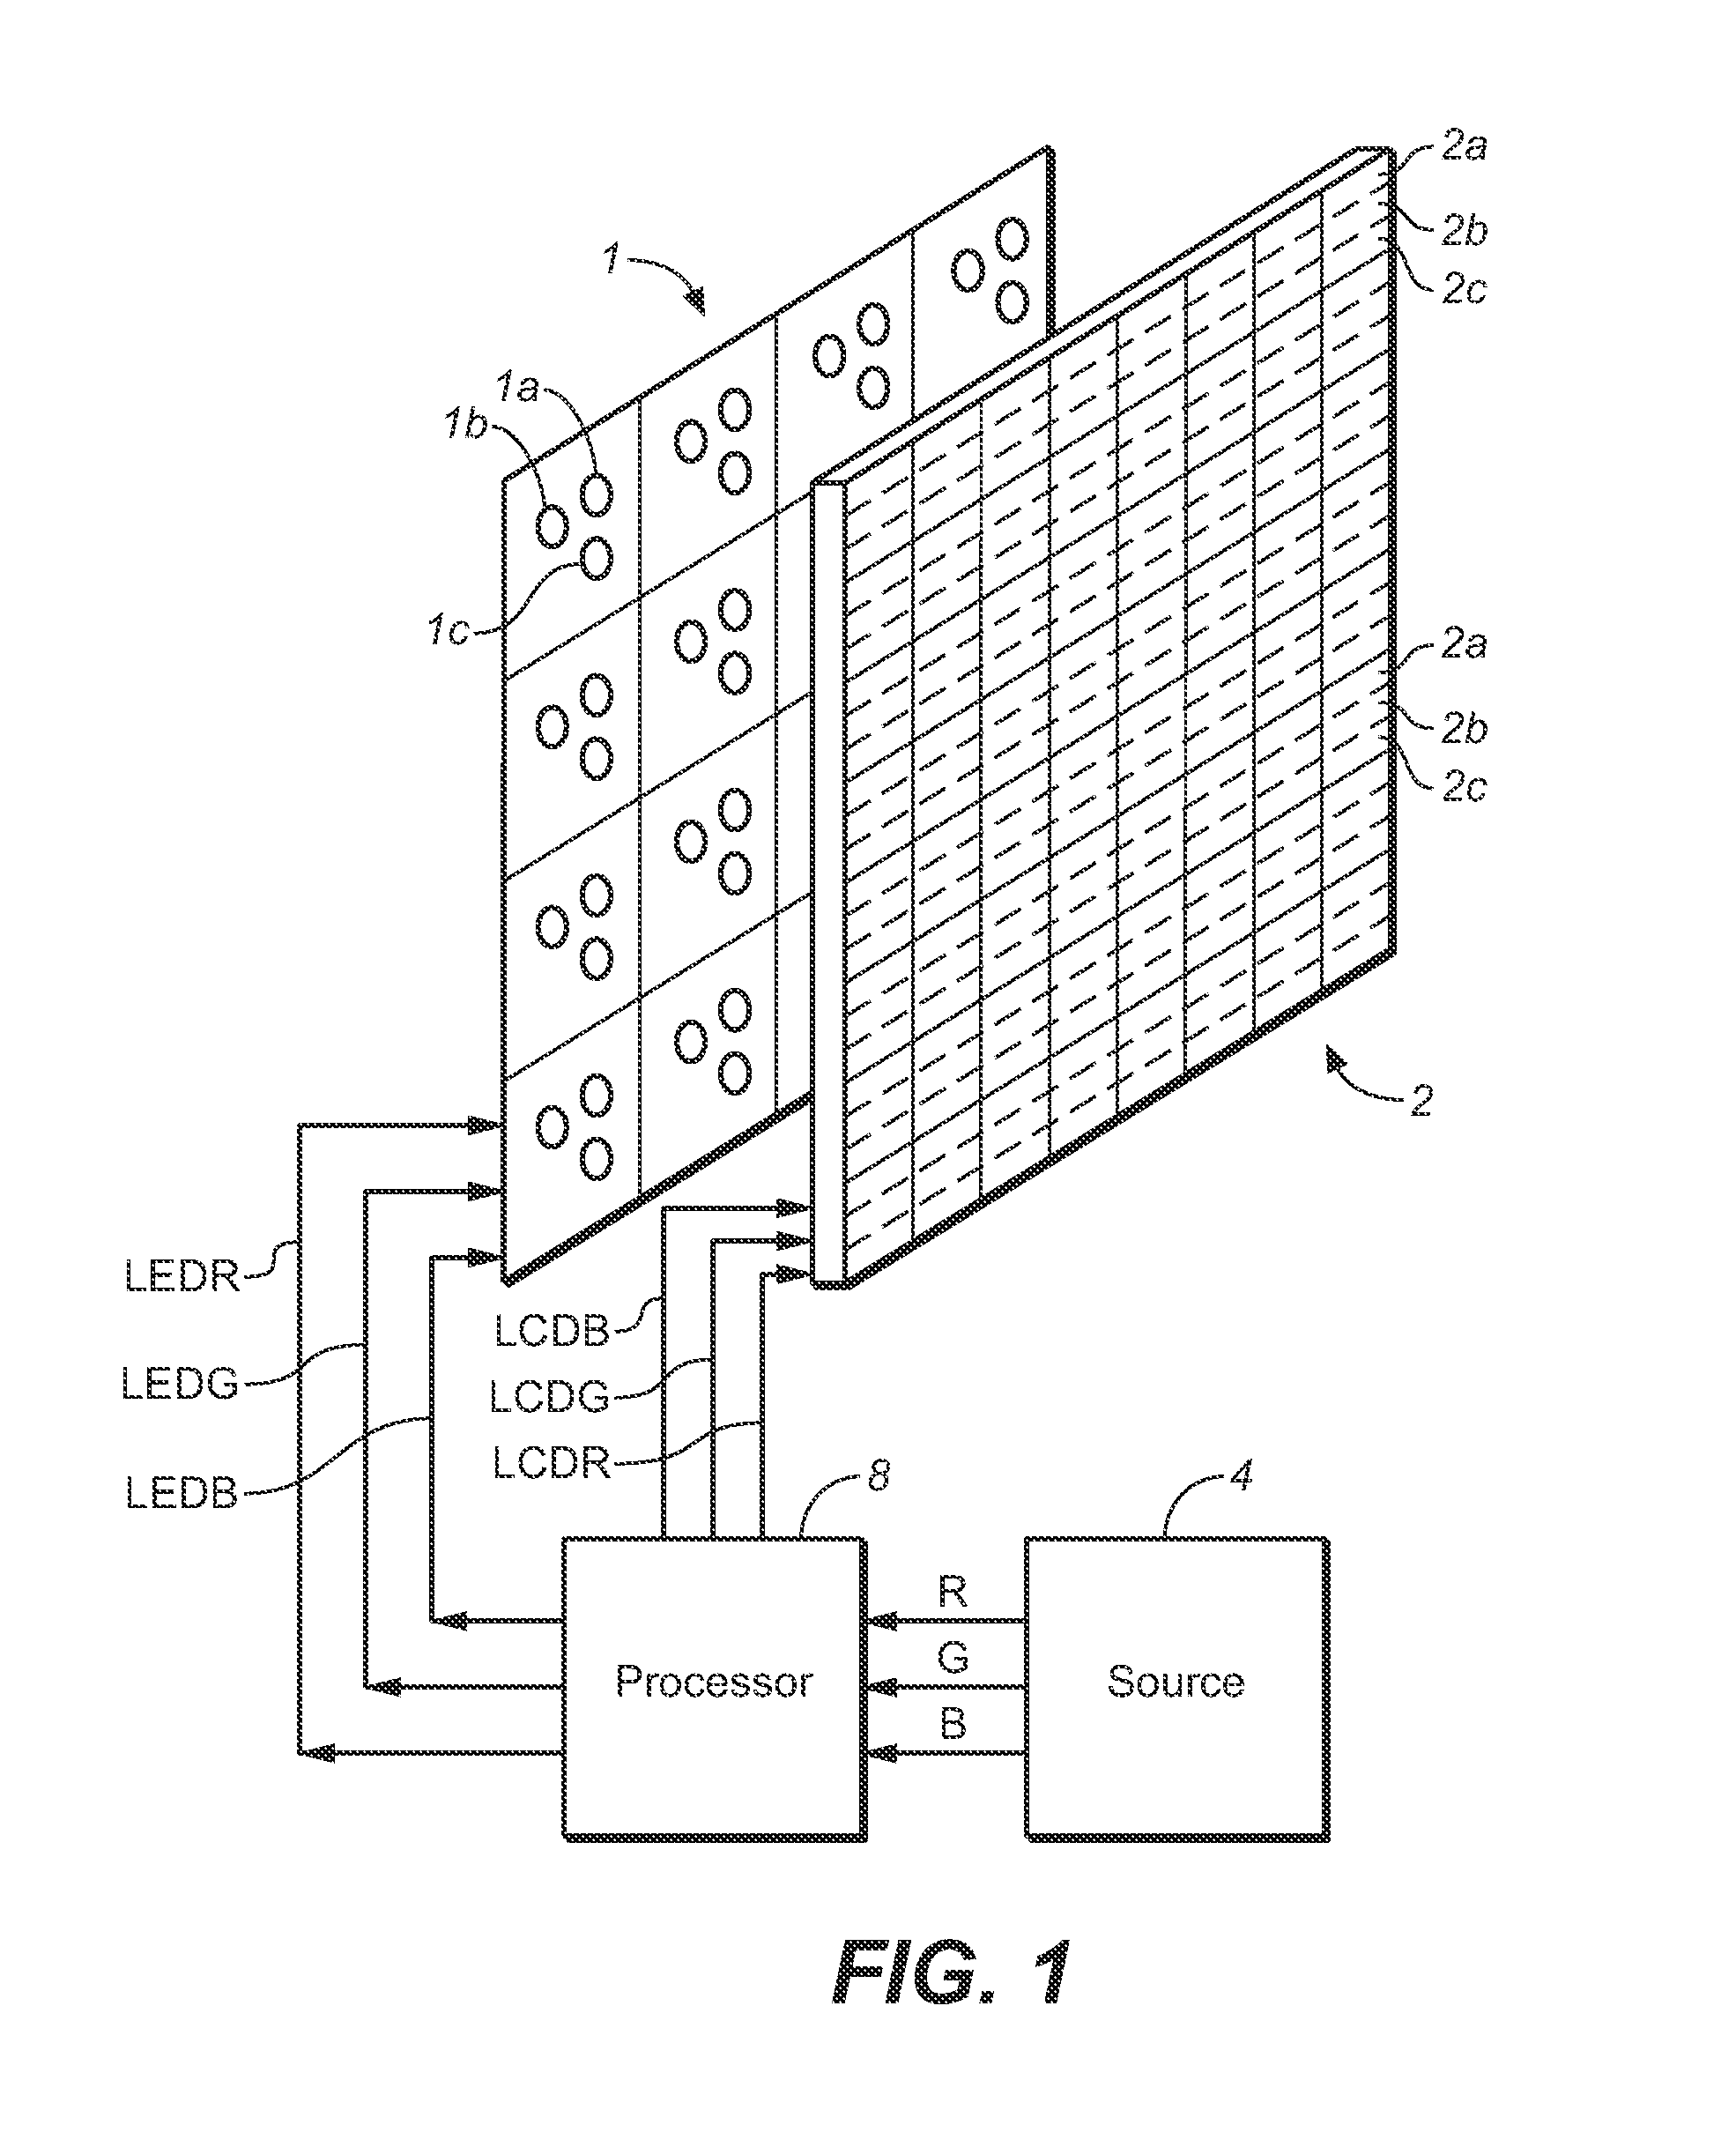 Method and System for Backlight Control Using Statistical Attributes of Image Data Blocks